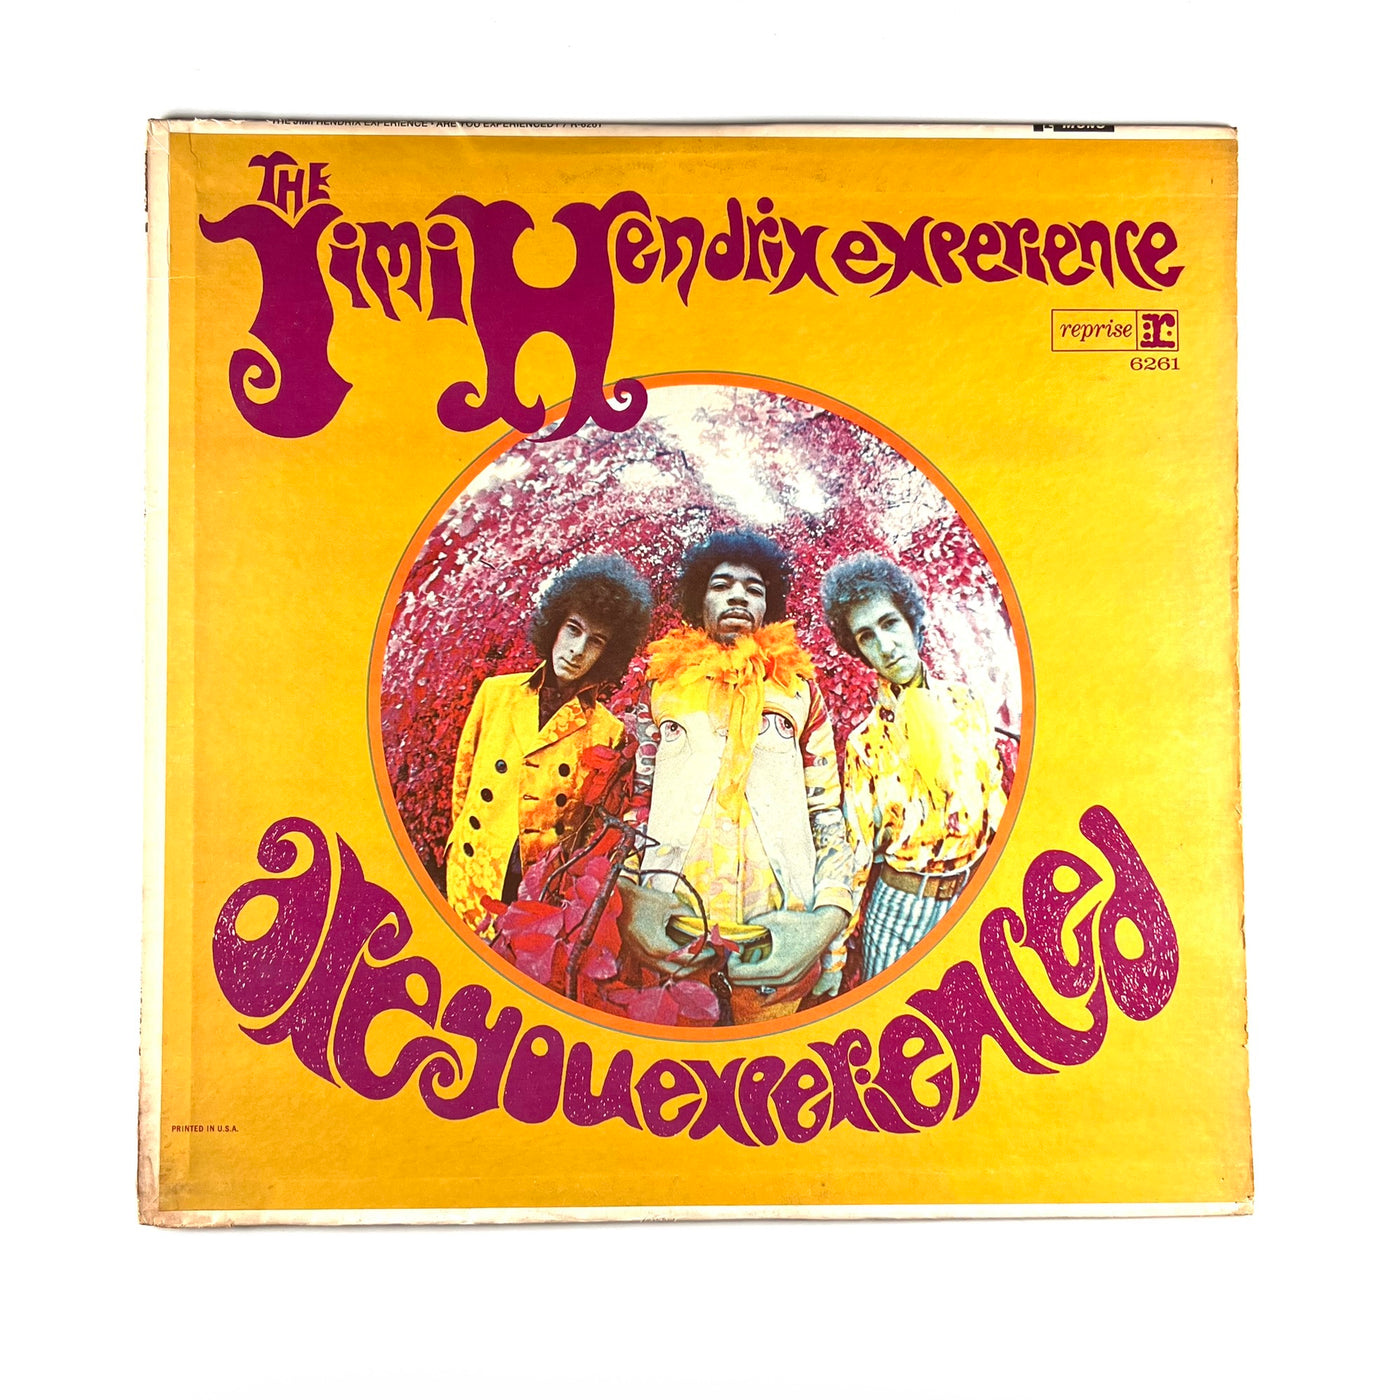 The Jimi Hendrix Experience - Are You Experienced? - 1967 First Mono Press